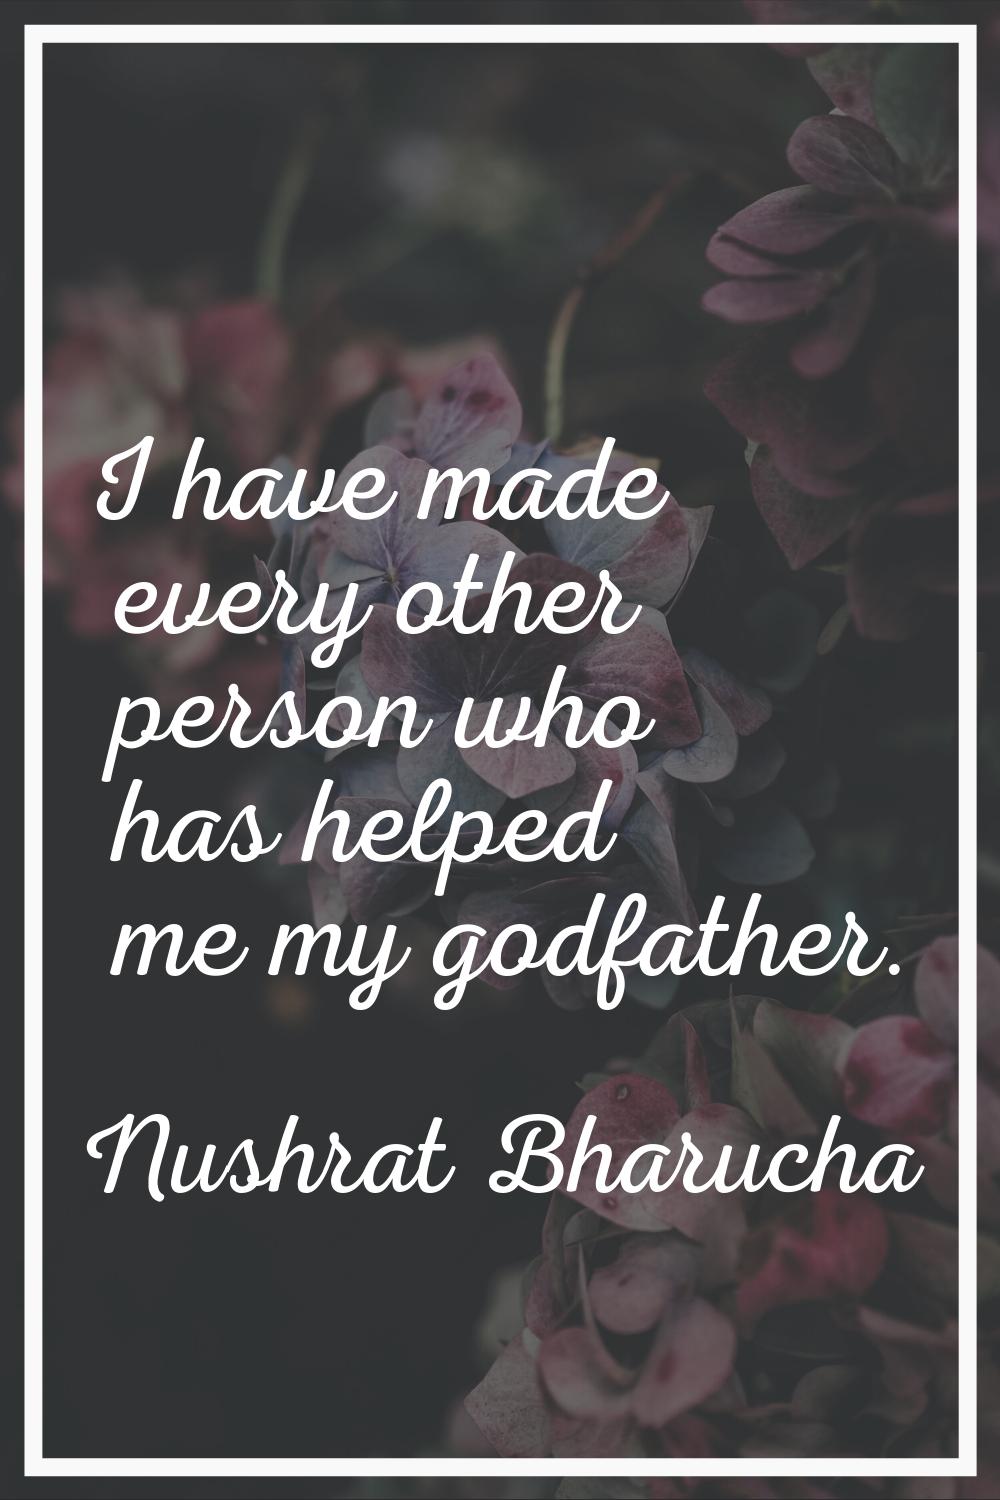 I have made every other person who has helped me my godfather.